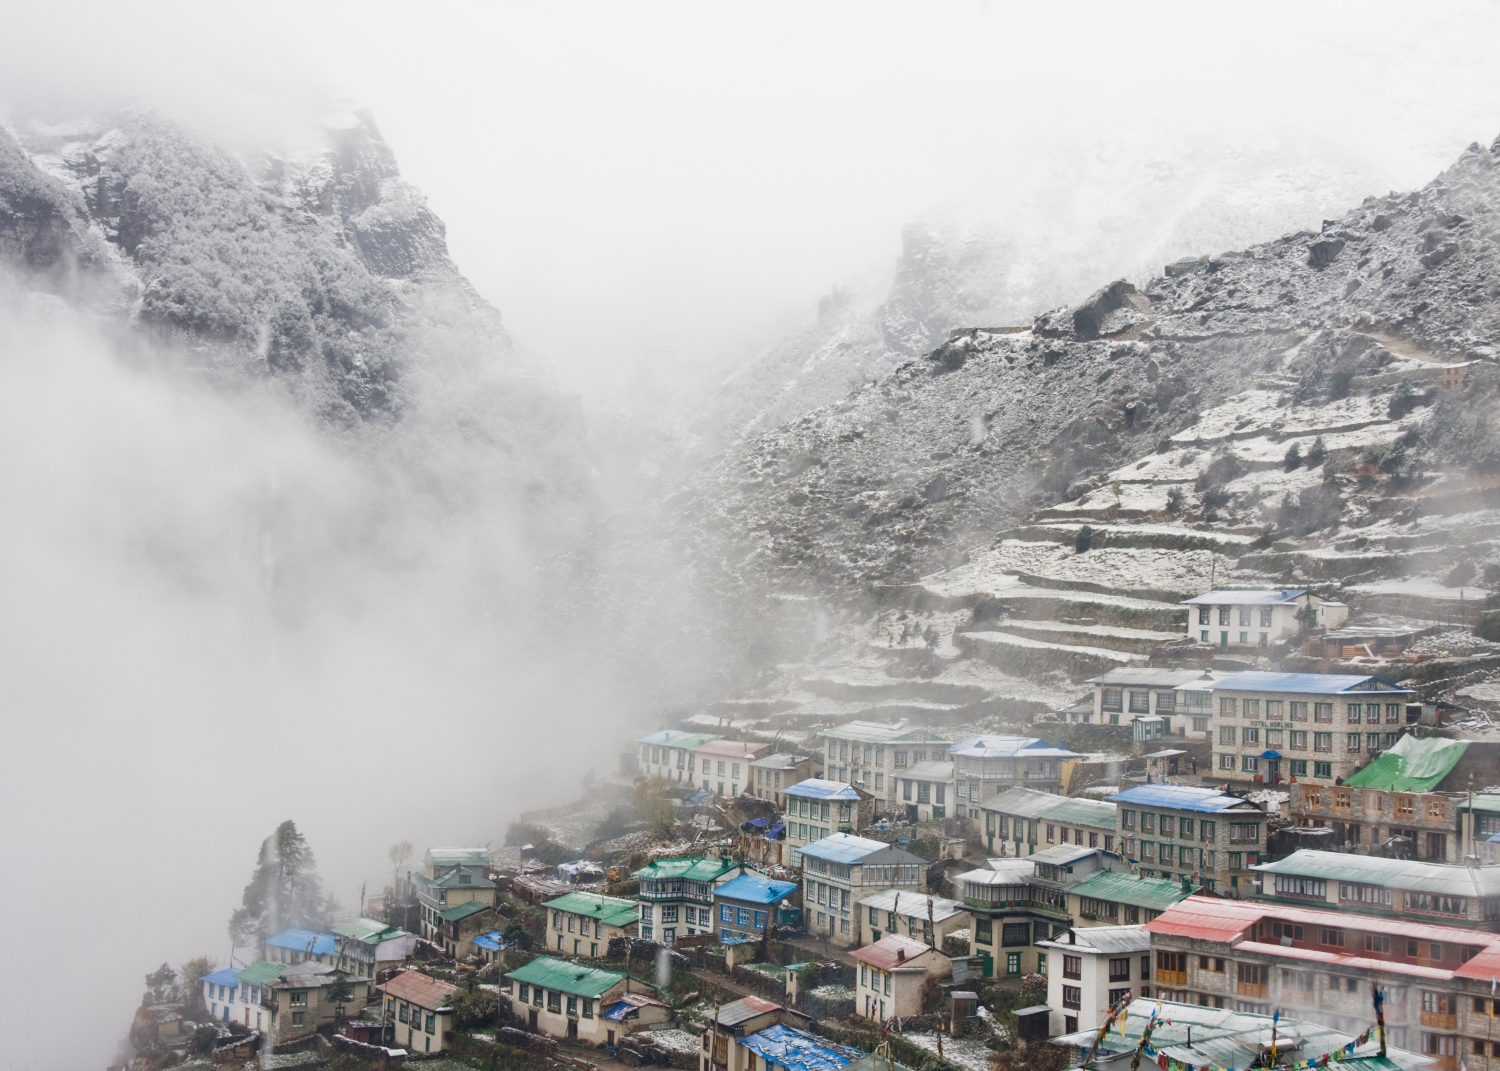 Snow arriving in Namche Bazaar. Image by Ethan Welty / Getty Images.